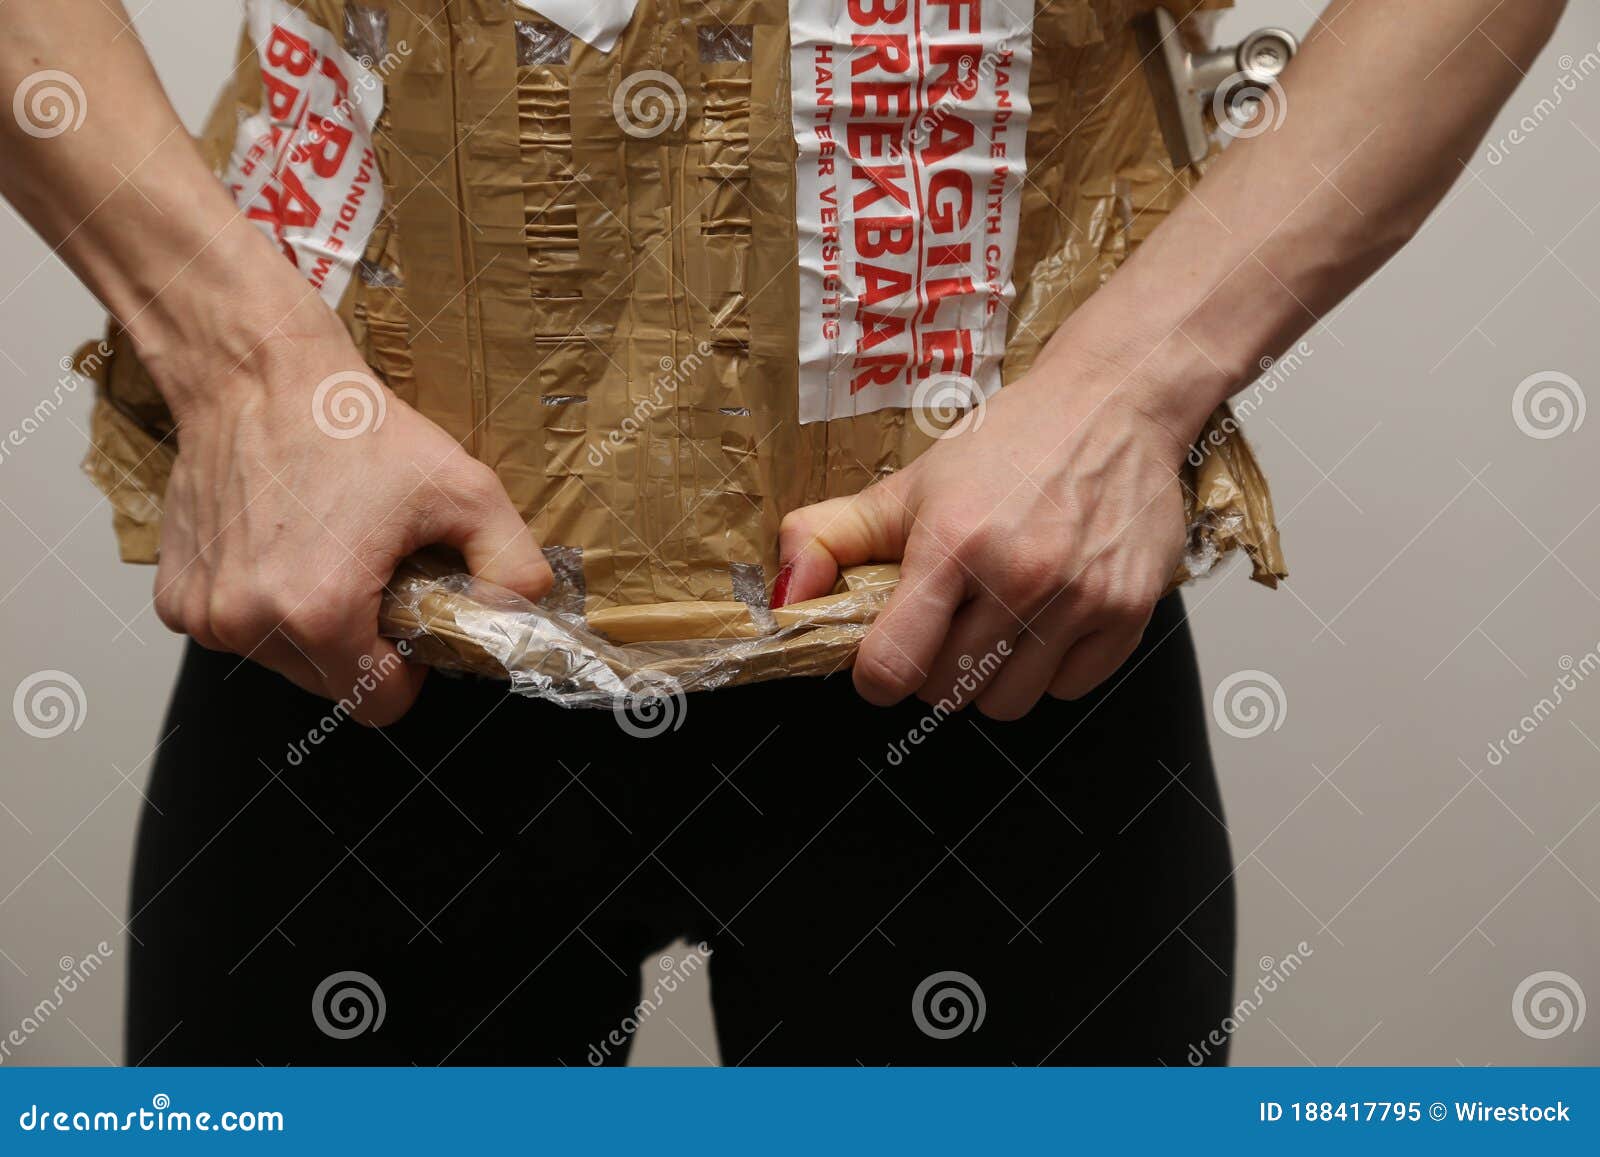 a women removing fragile packaging from her body. emotional baggage concept